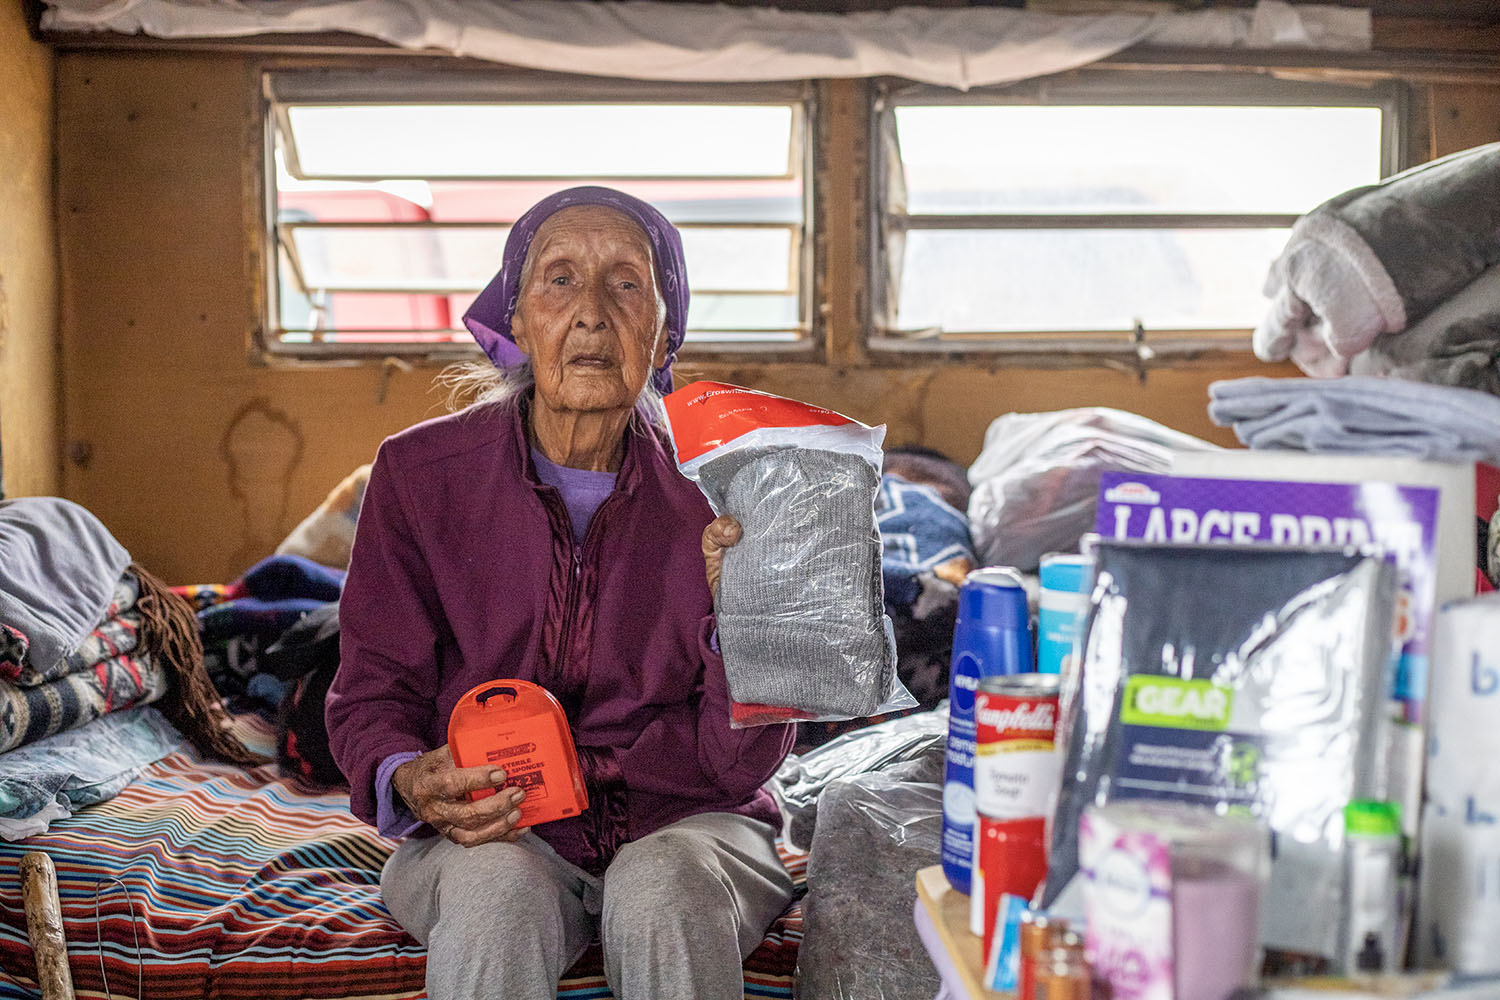 Winter Supplies for a 90-Year-Old Navajo Native